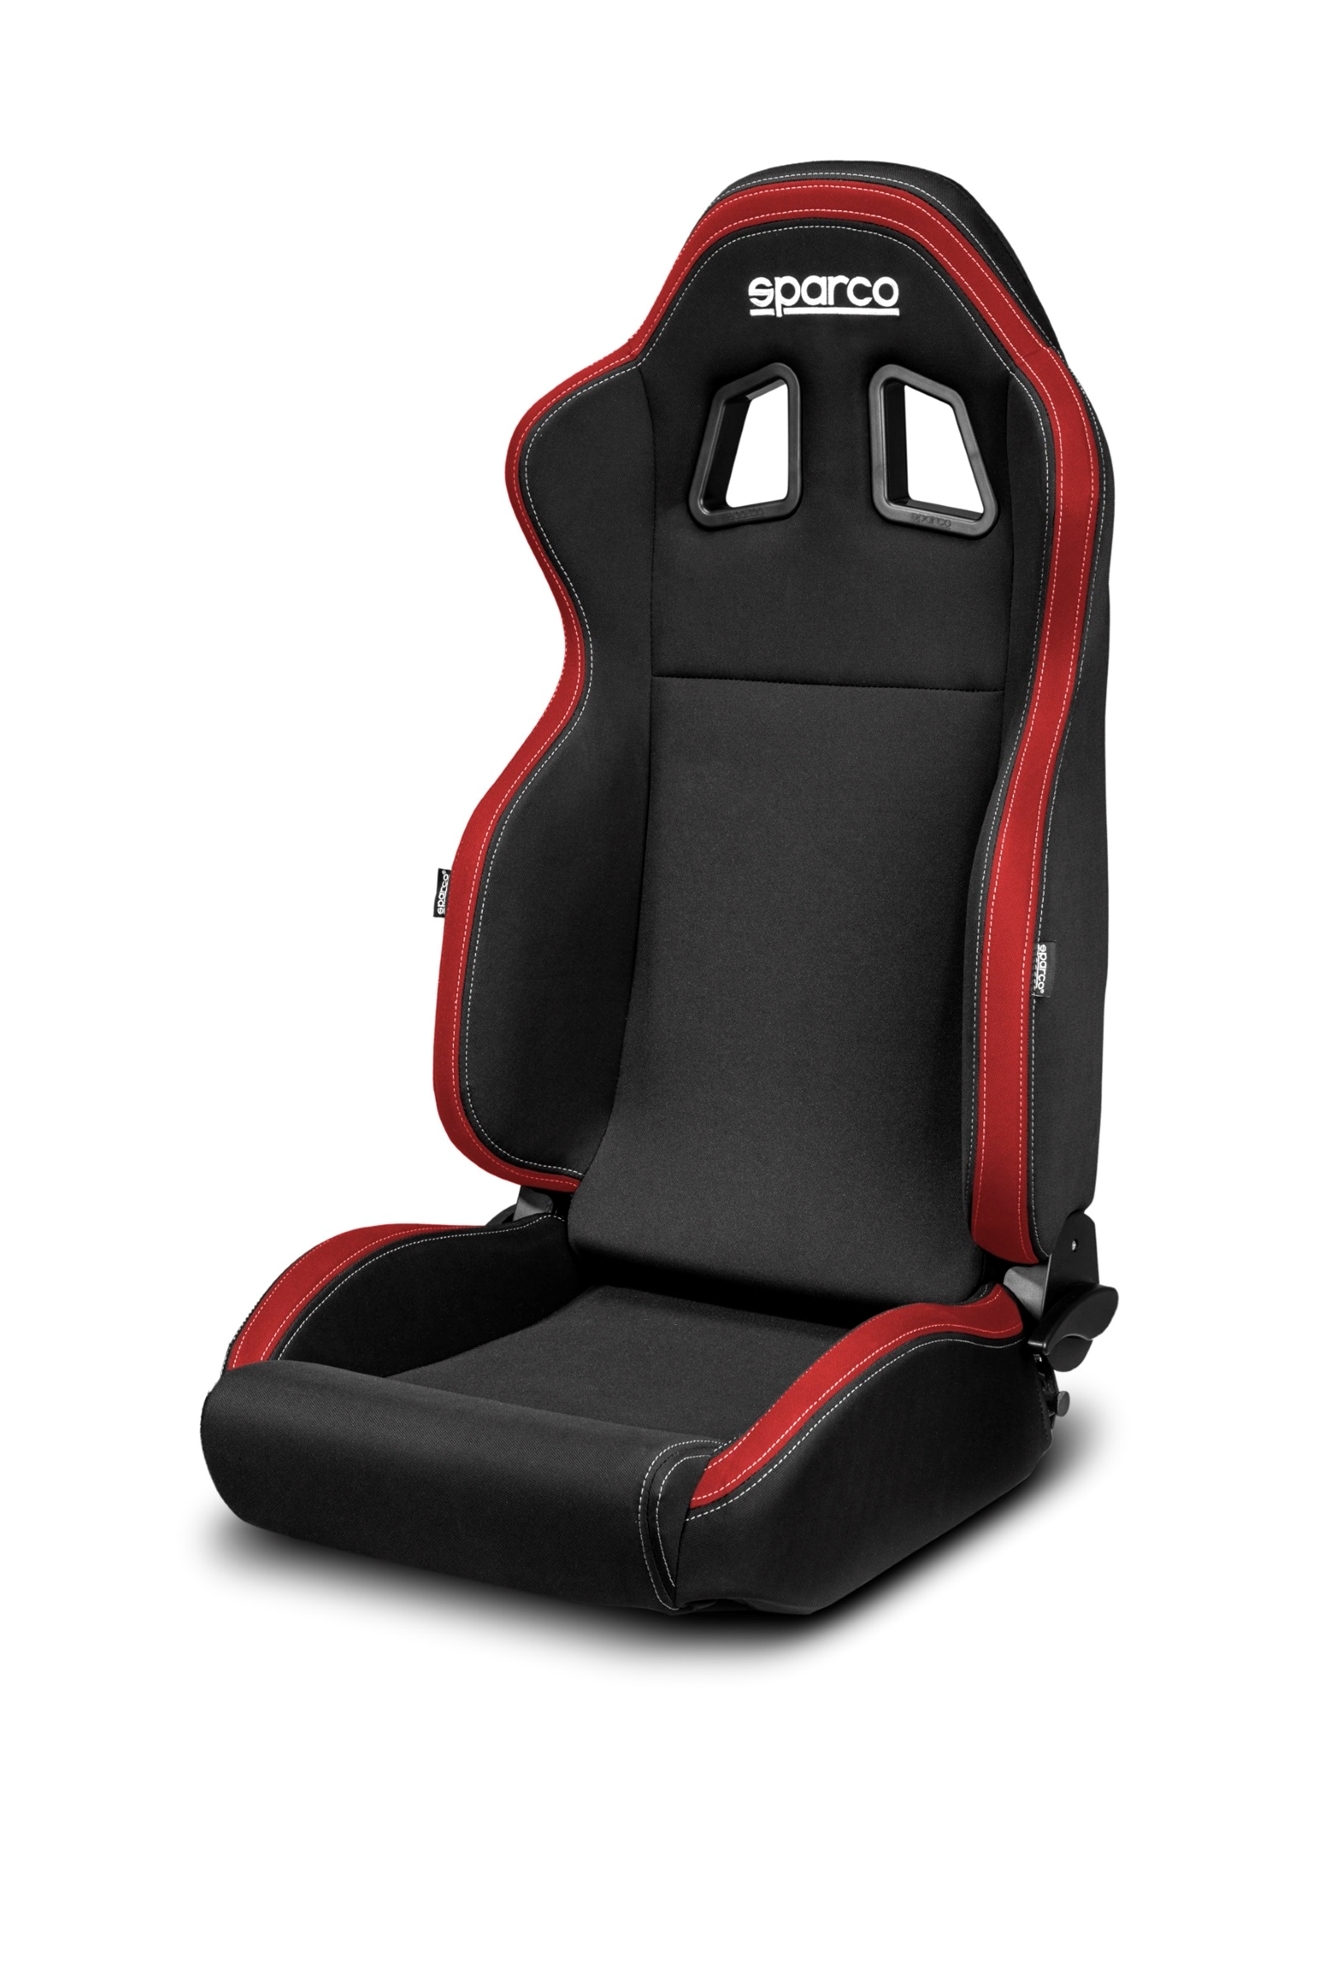 Sparco R100 Seat (Black / Red)